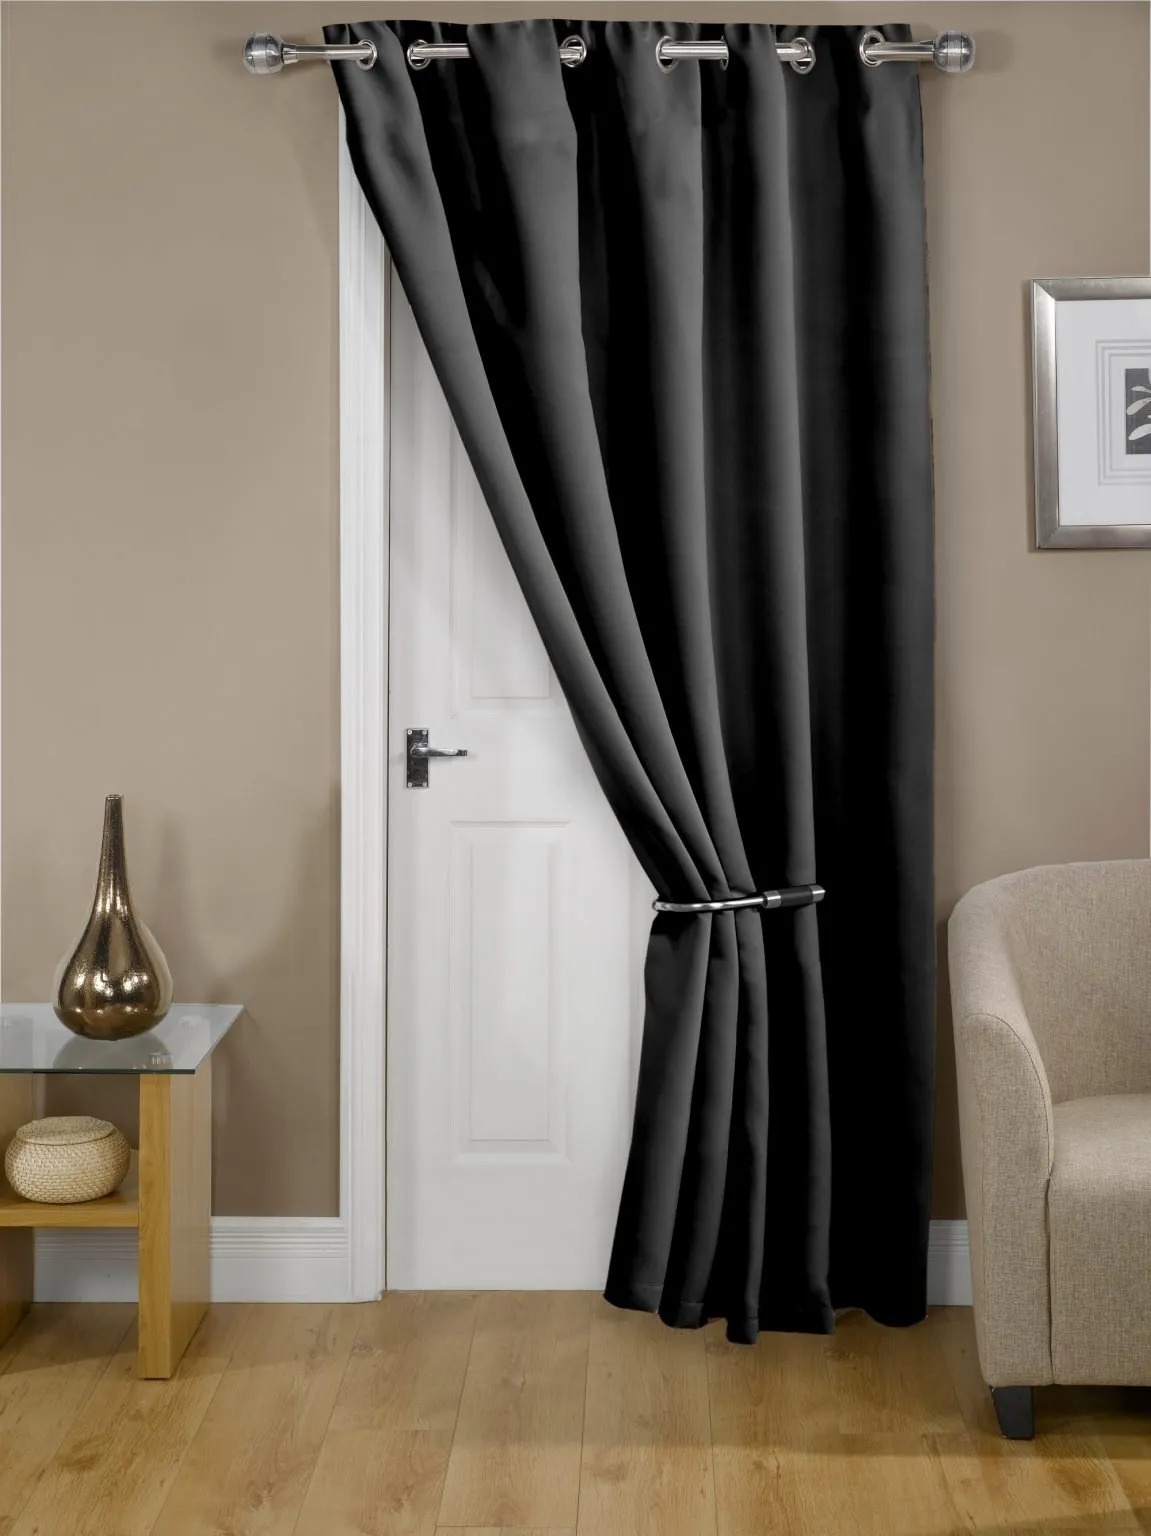 Woven Thermal Blackout Eyelet Door Curtain in Black 168x213cms